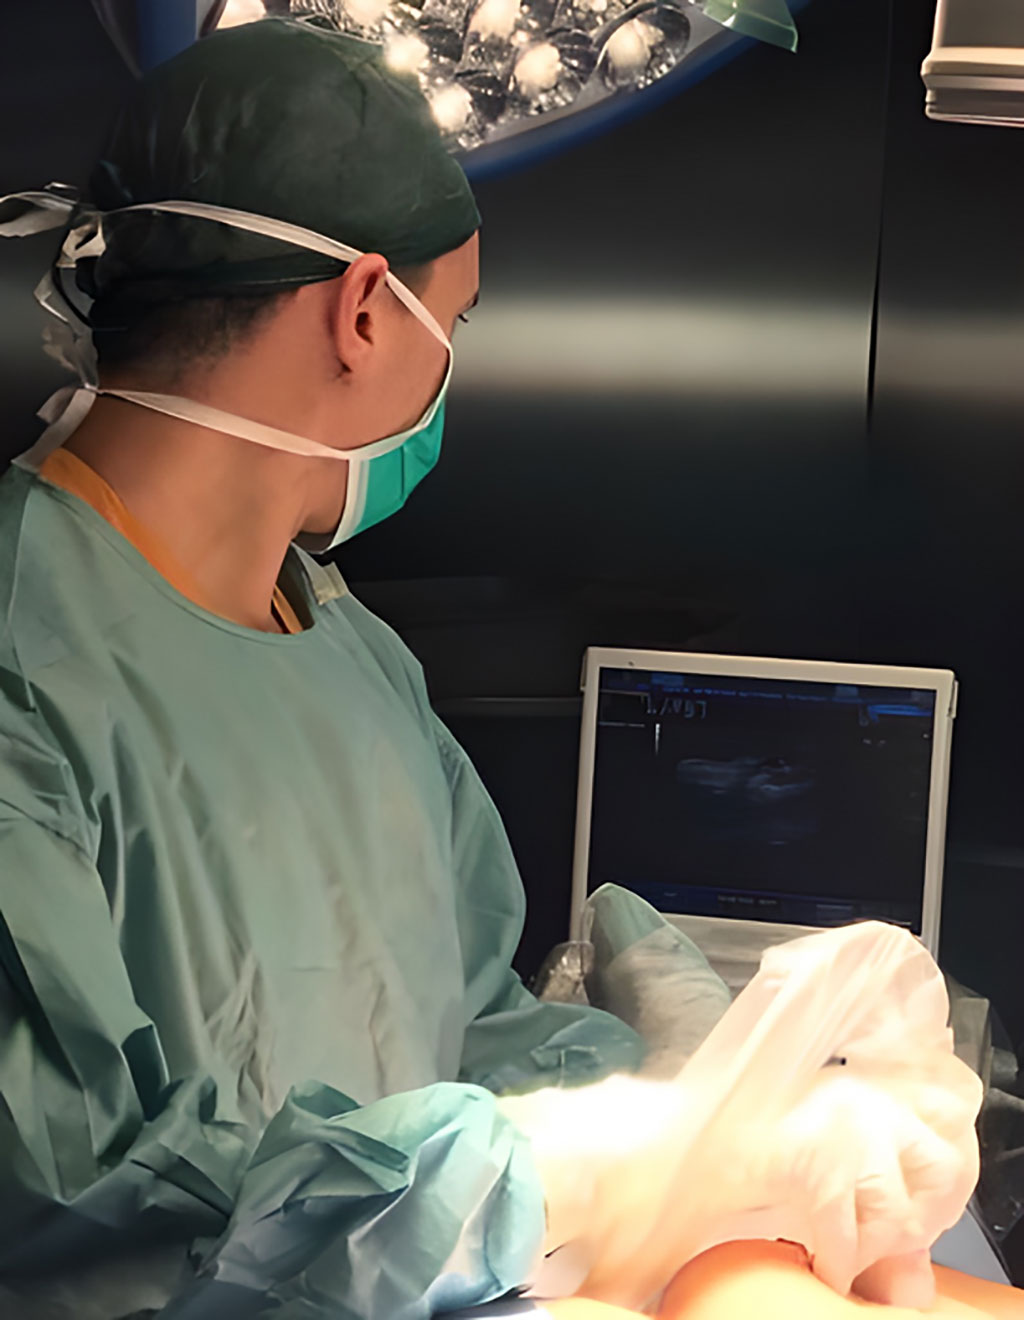 Image: Surgeon using IOUS to guide breast surgery (Photo courtesy of Clinica Universidad de Navarra)